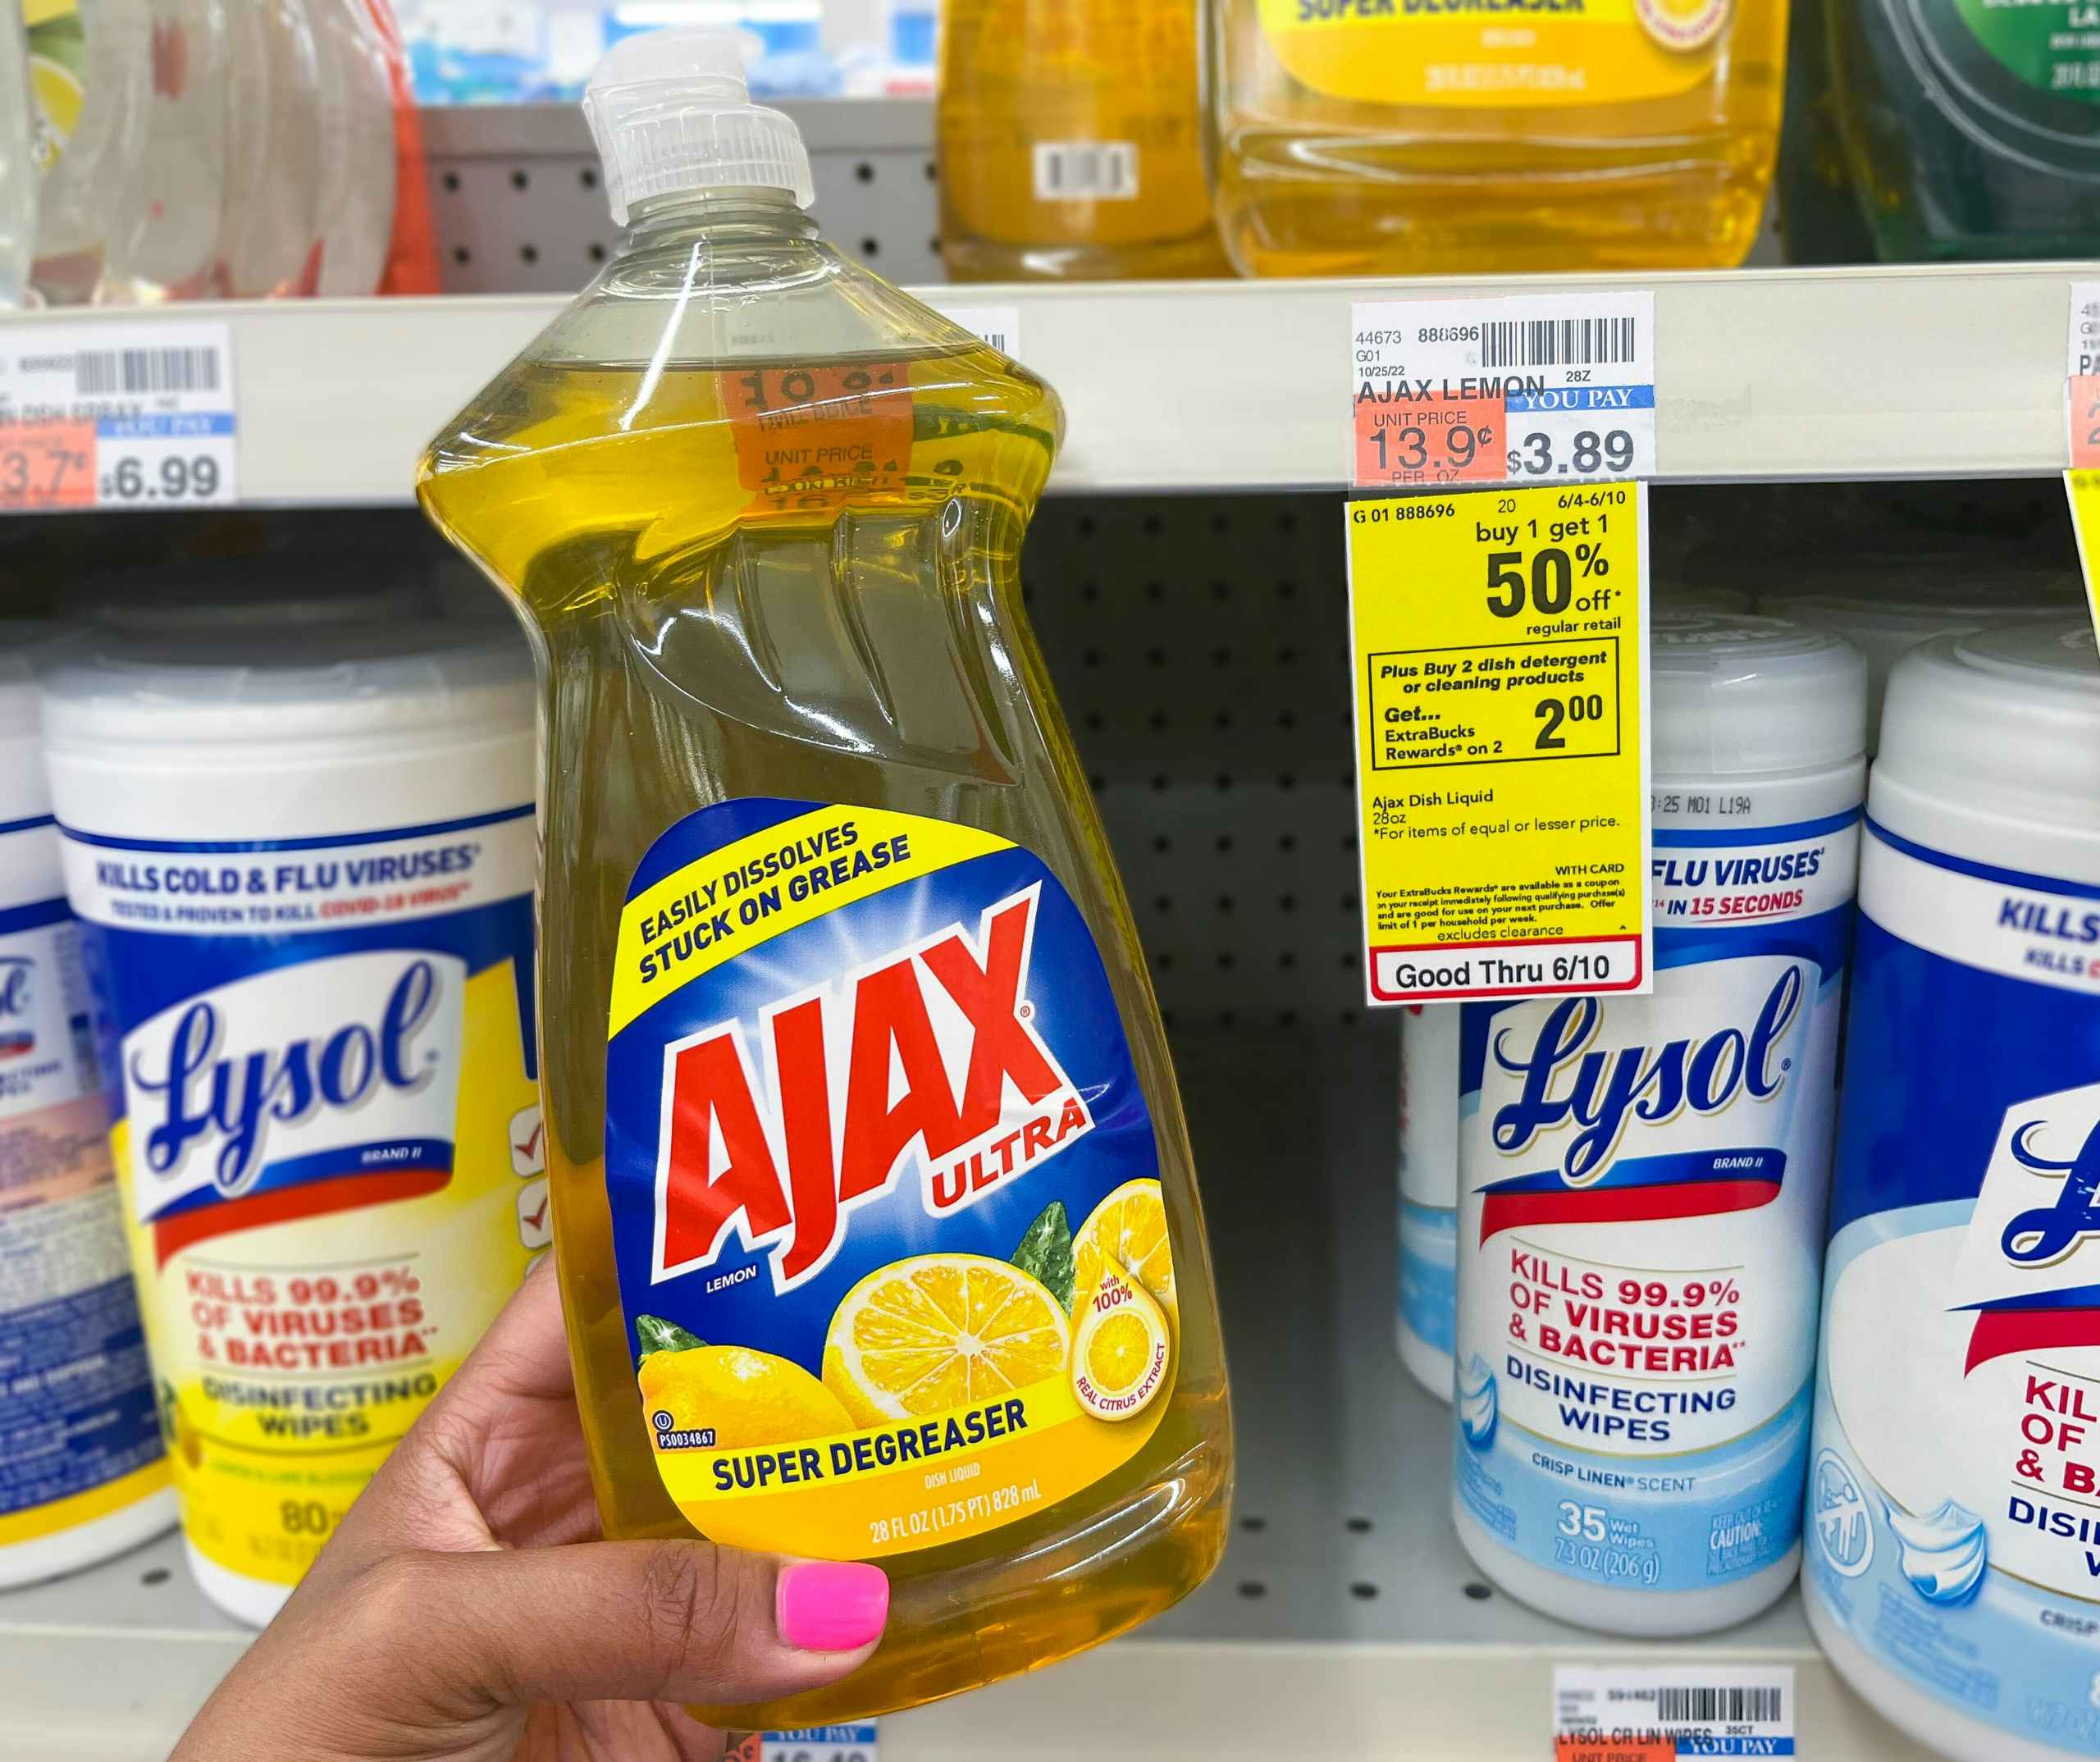 hand holding Ajax dish soap bottle next to sales tag